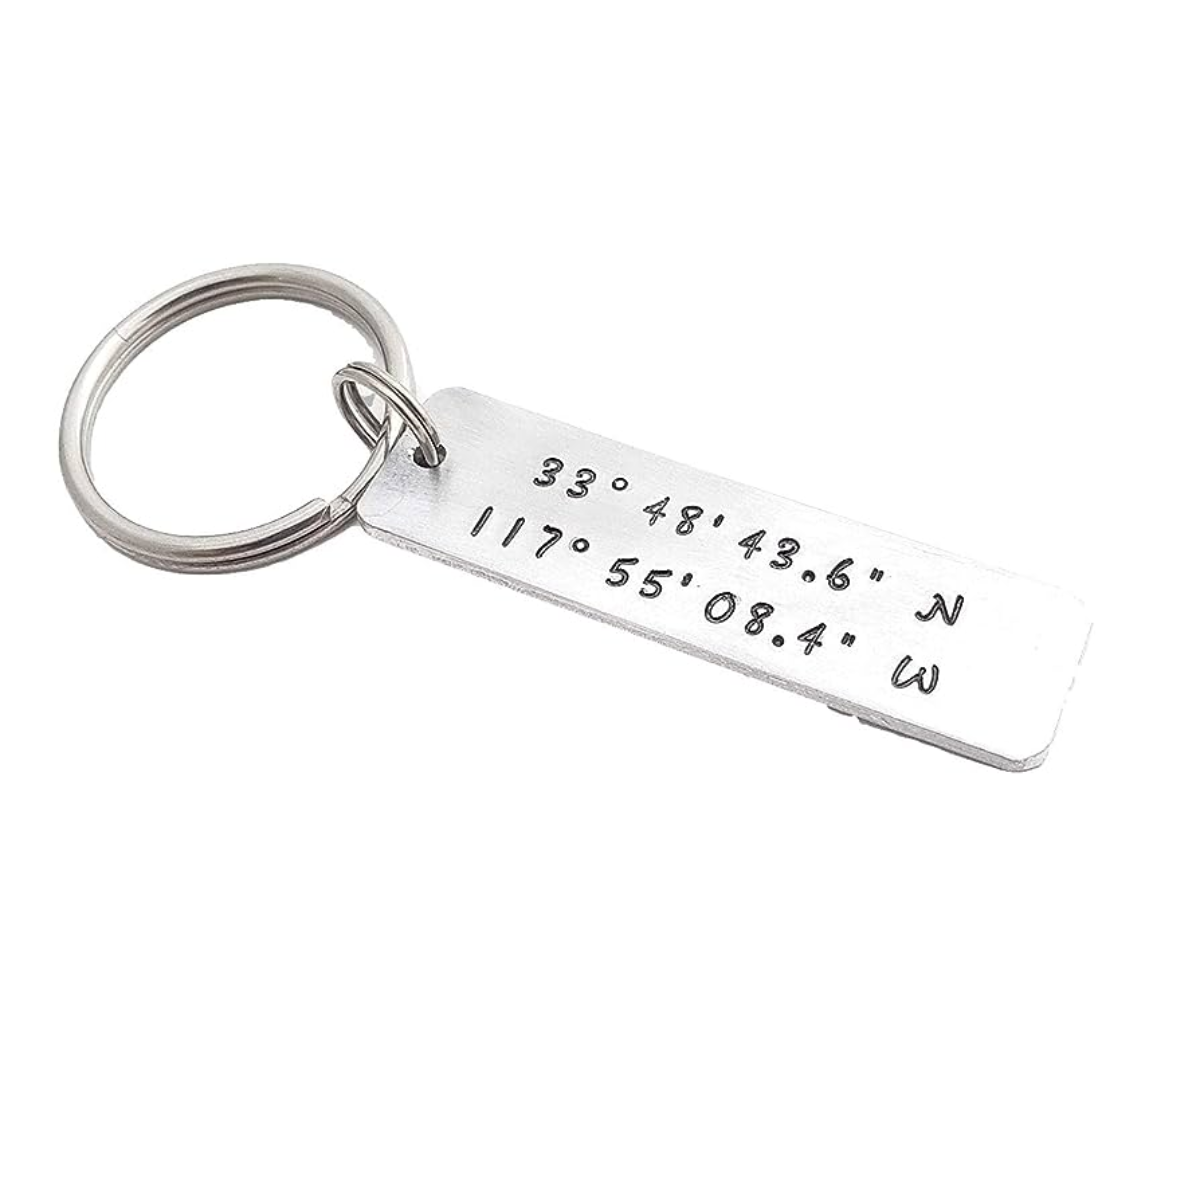 28. Forever Remembered: Personalized Coordinates Keychain, the Perfect Anniversary Gift Idea